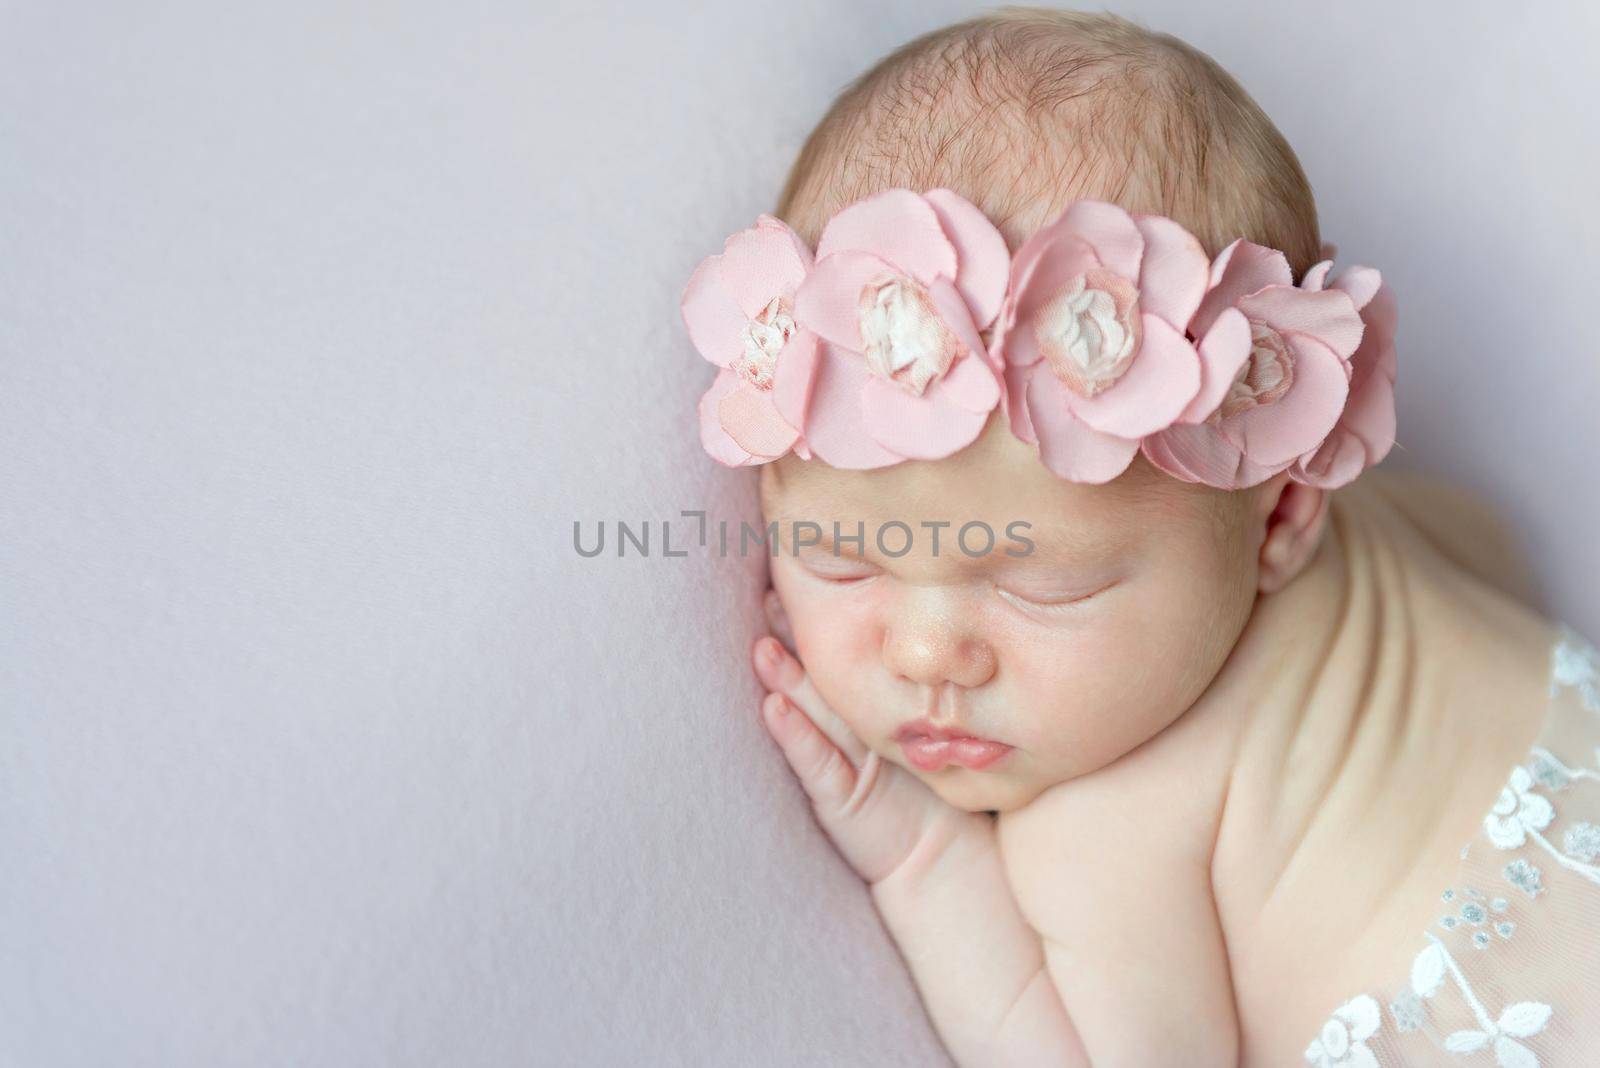 Sweet little girl with massive pink flowers on her head napping on her belly